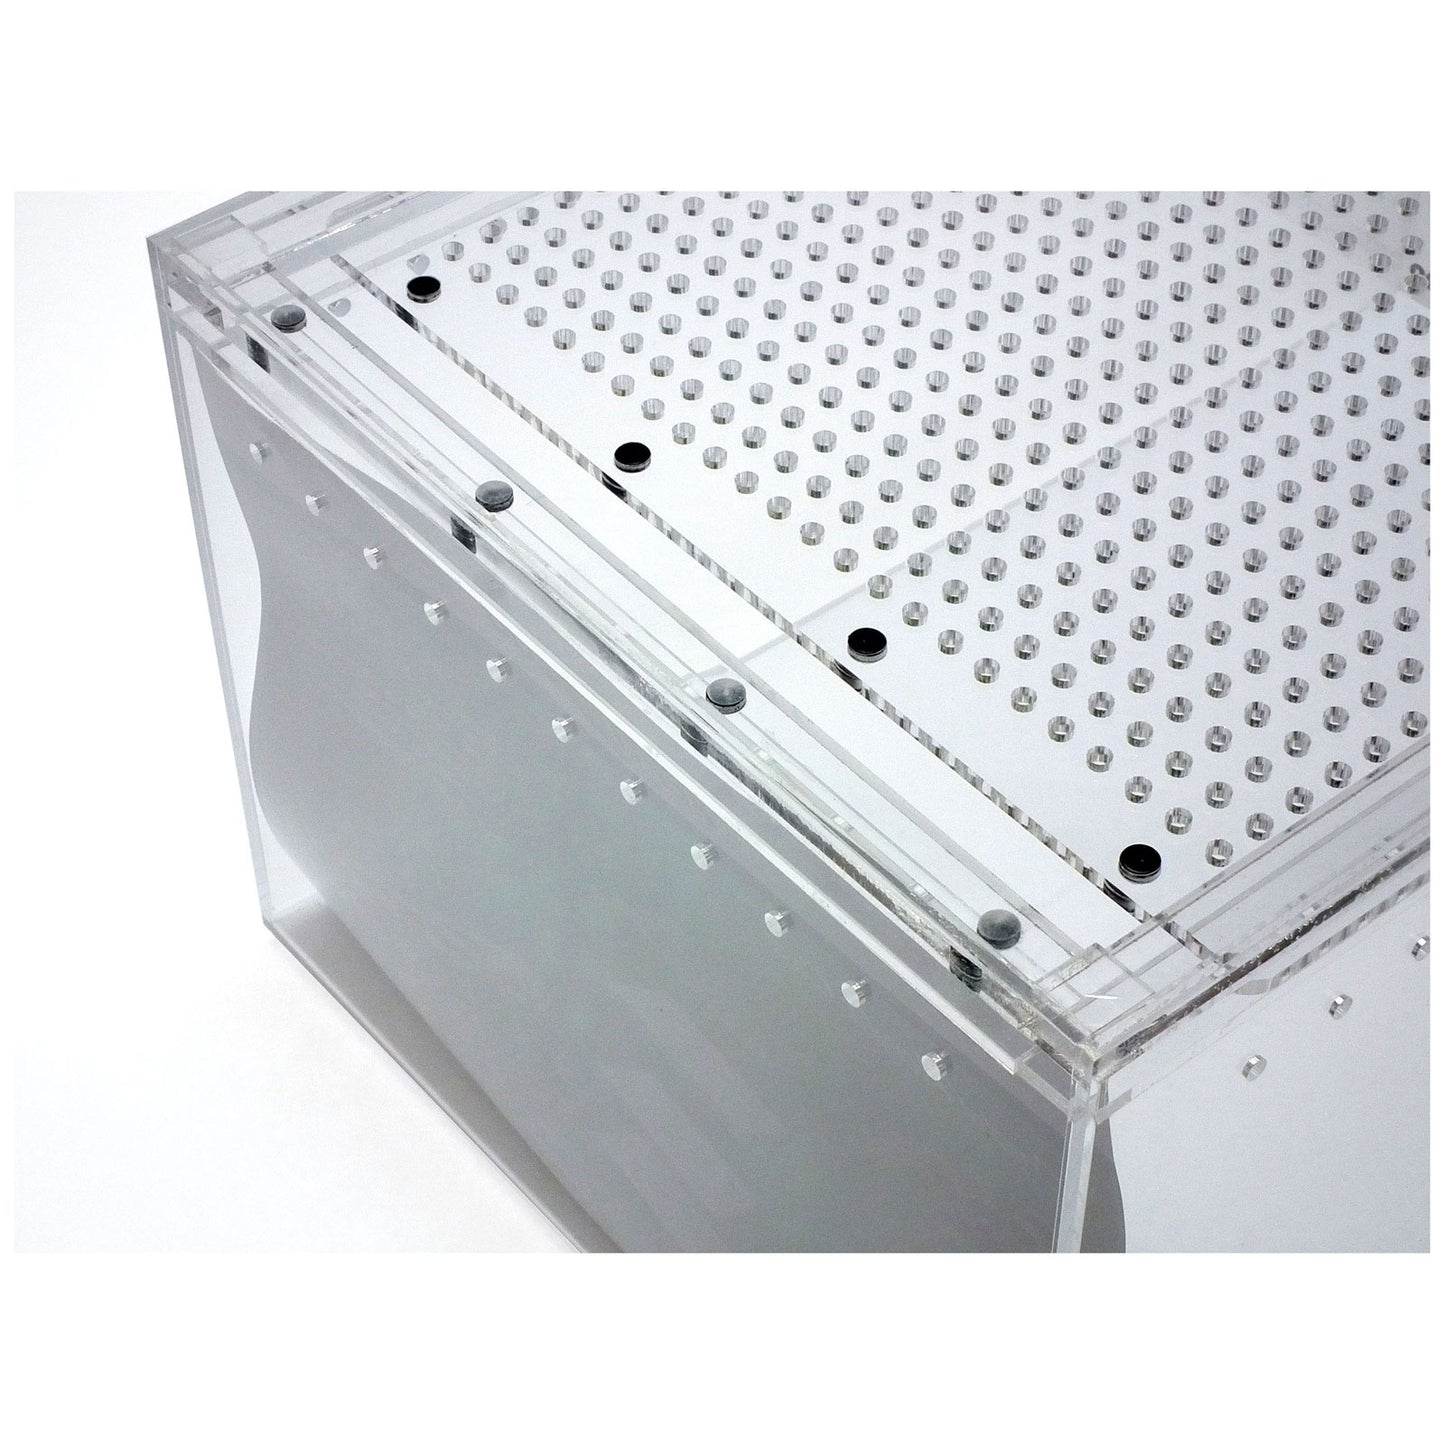 Acrylic Tank with Magnetic Locking Lid - 400 x 300 x 150mm